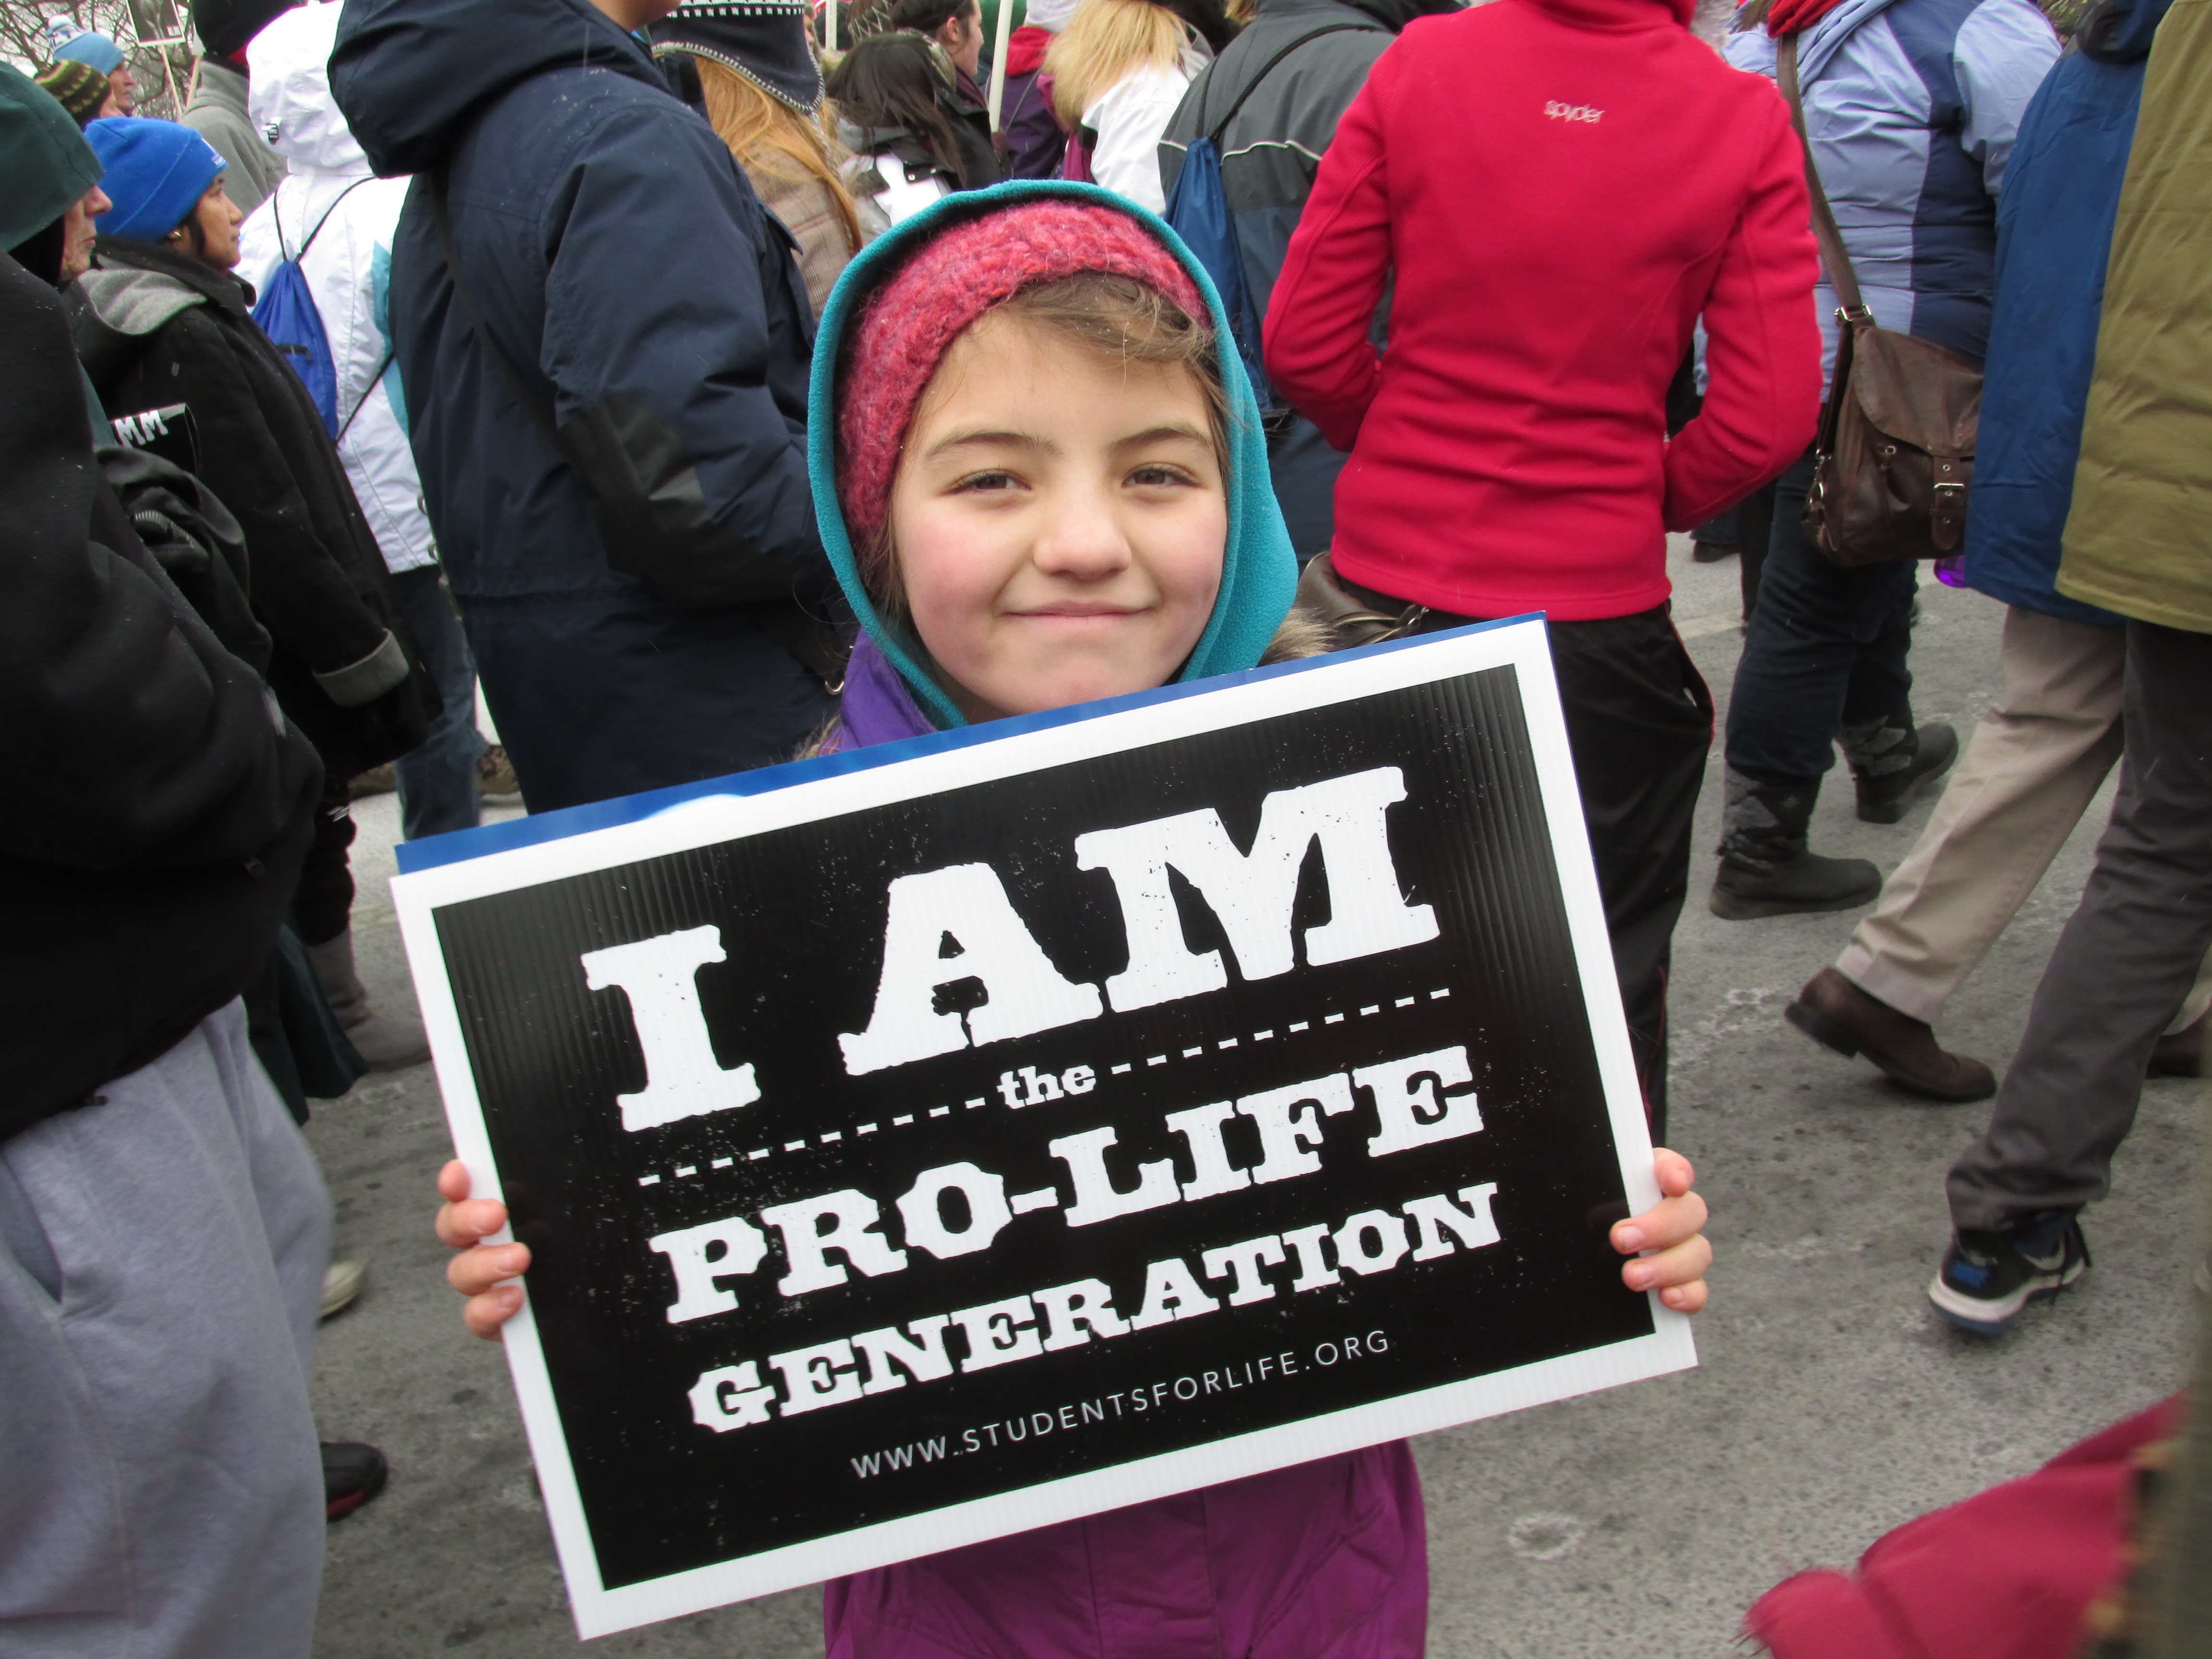 March for Life, Washington, D.C. (2013)